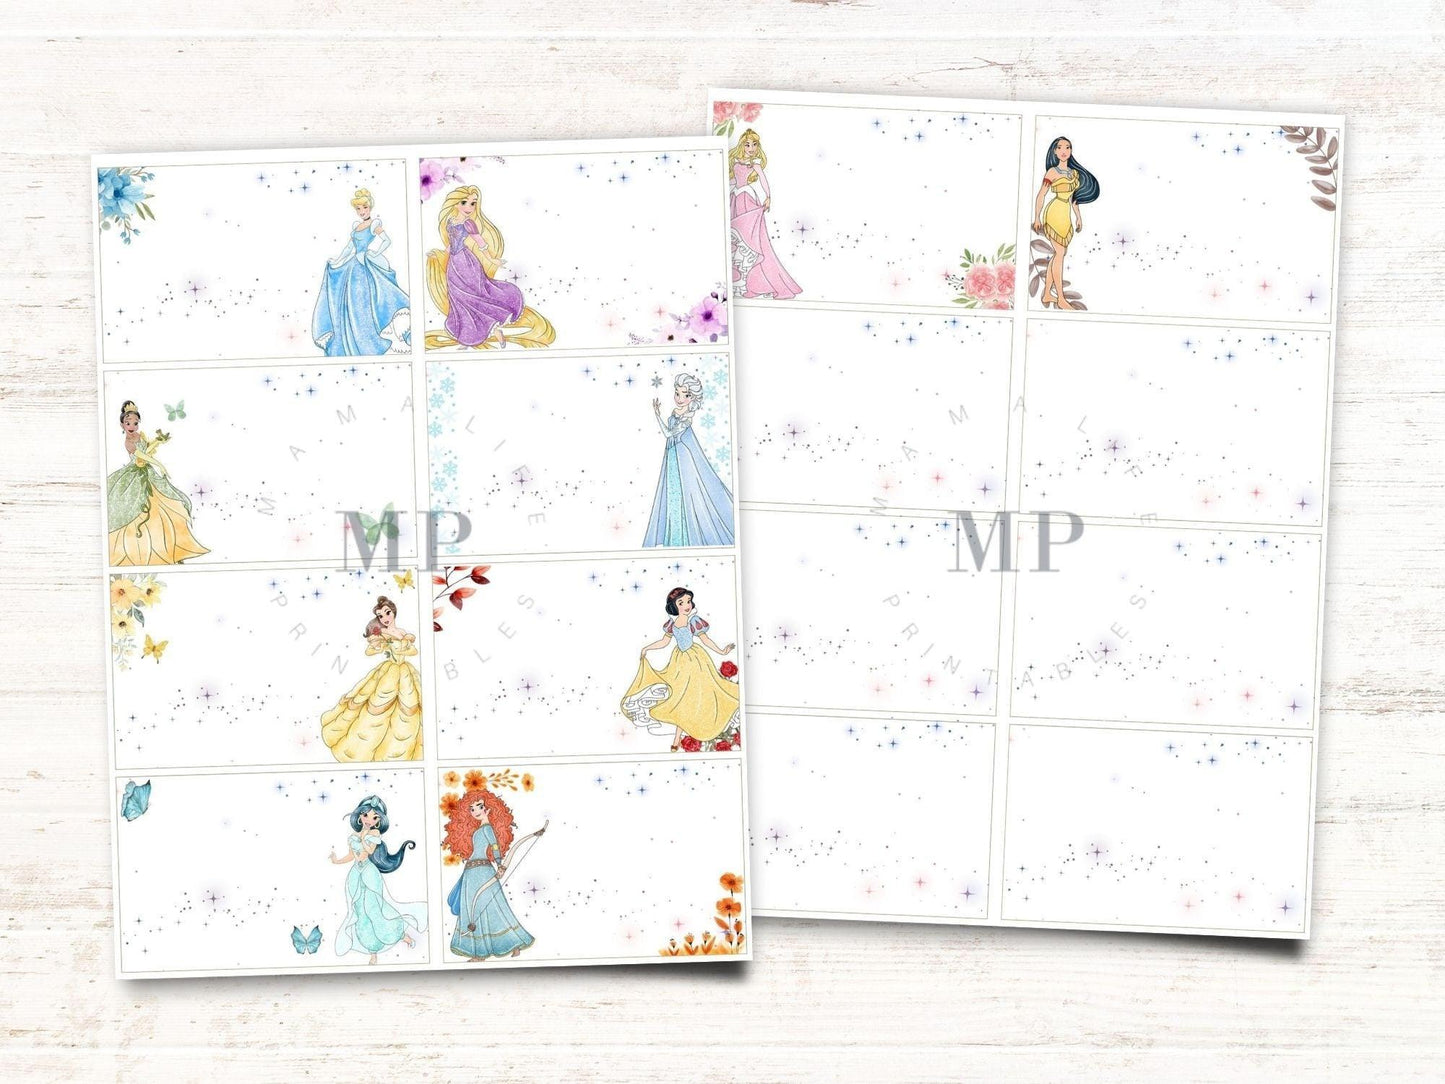 Princess Lunch Box Note Cards - Note Cards - Mama Life Printables